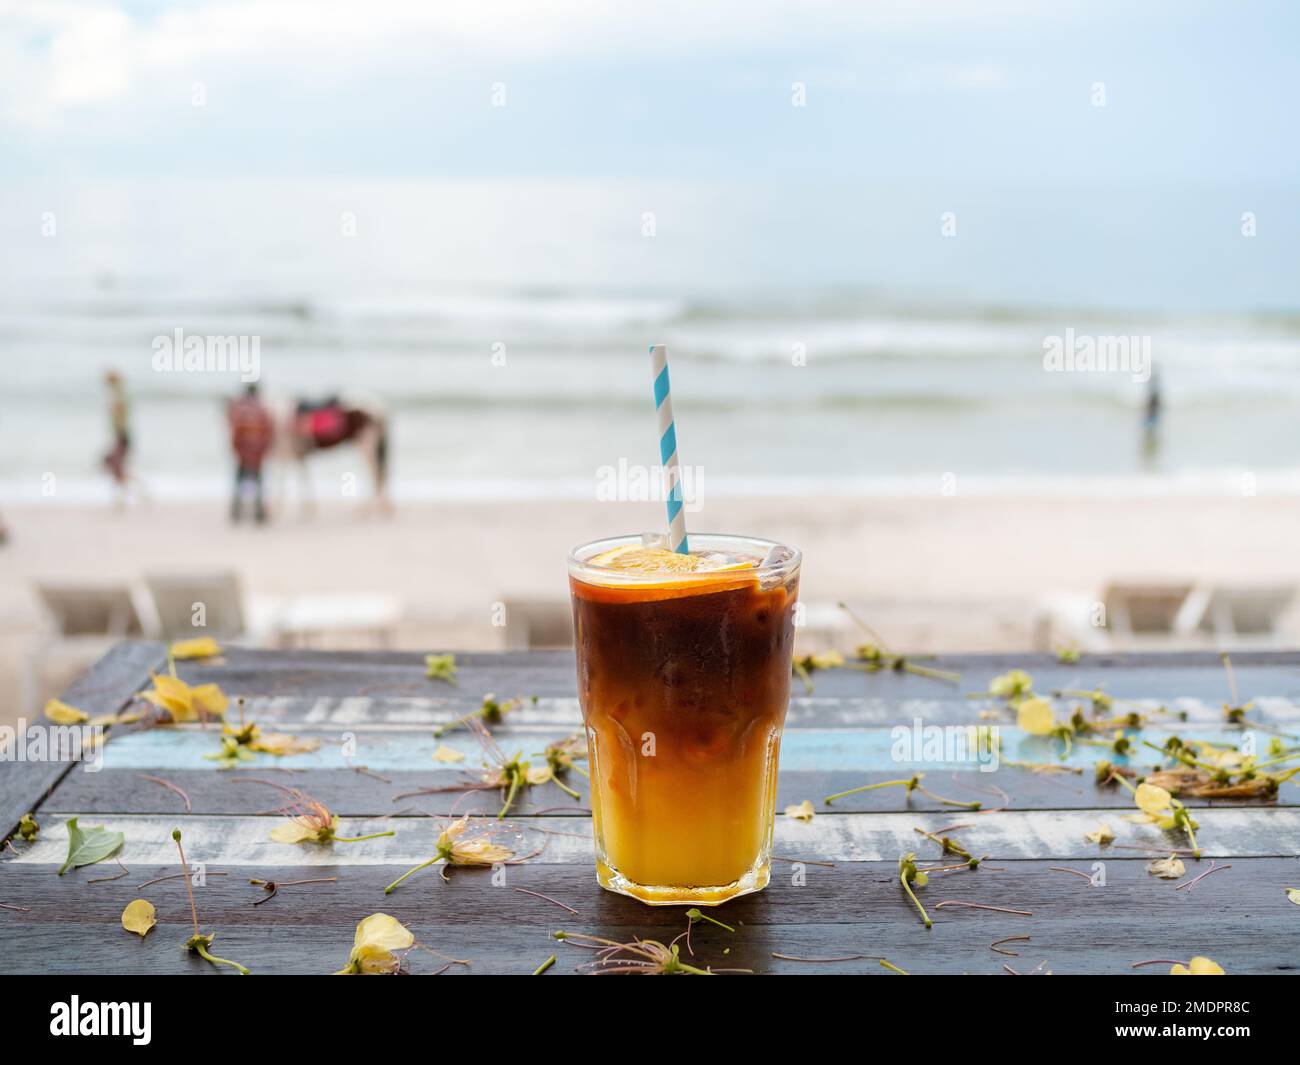 A glass of fresh iced orange americano decorated with sliced orange served on wooden table on the beach background, seascape view. Cold black coffee Stock Photo